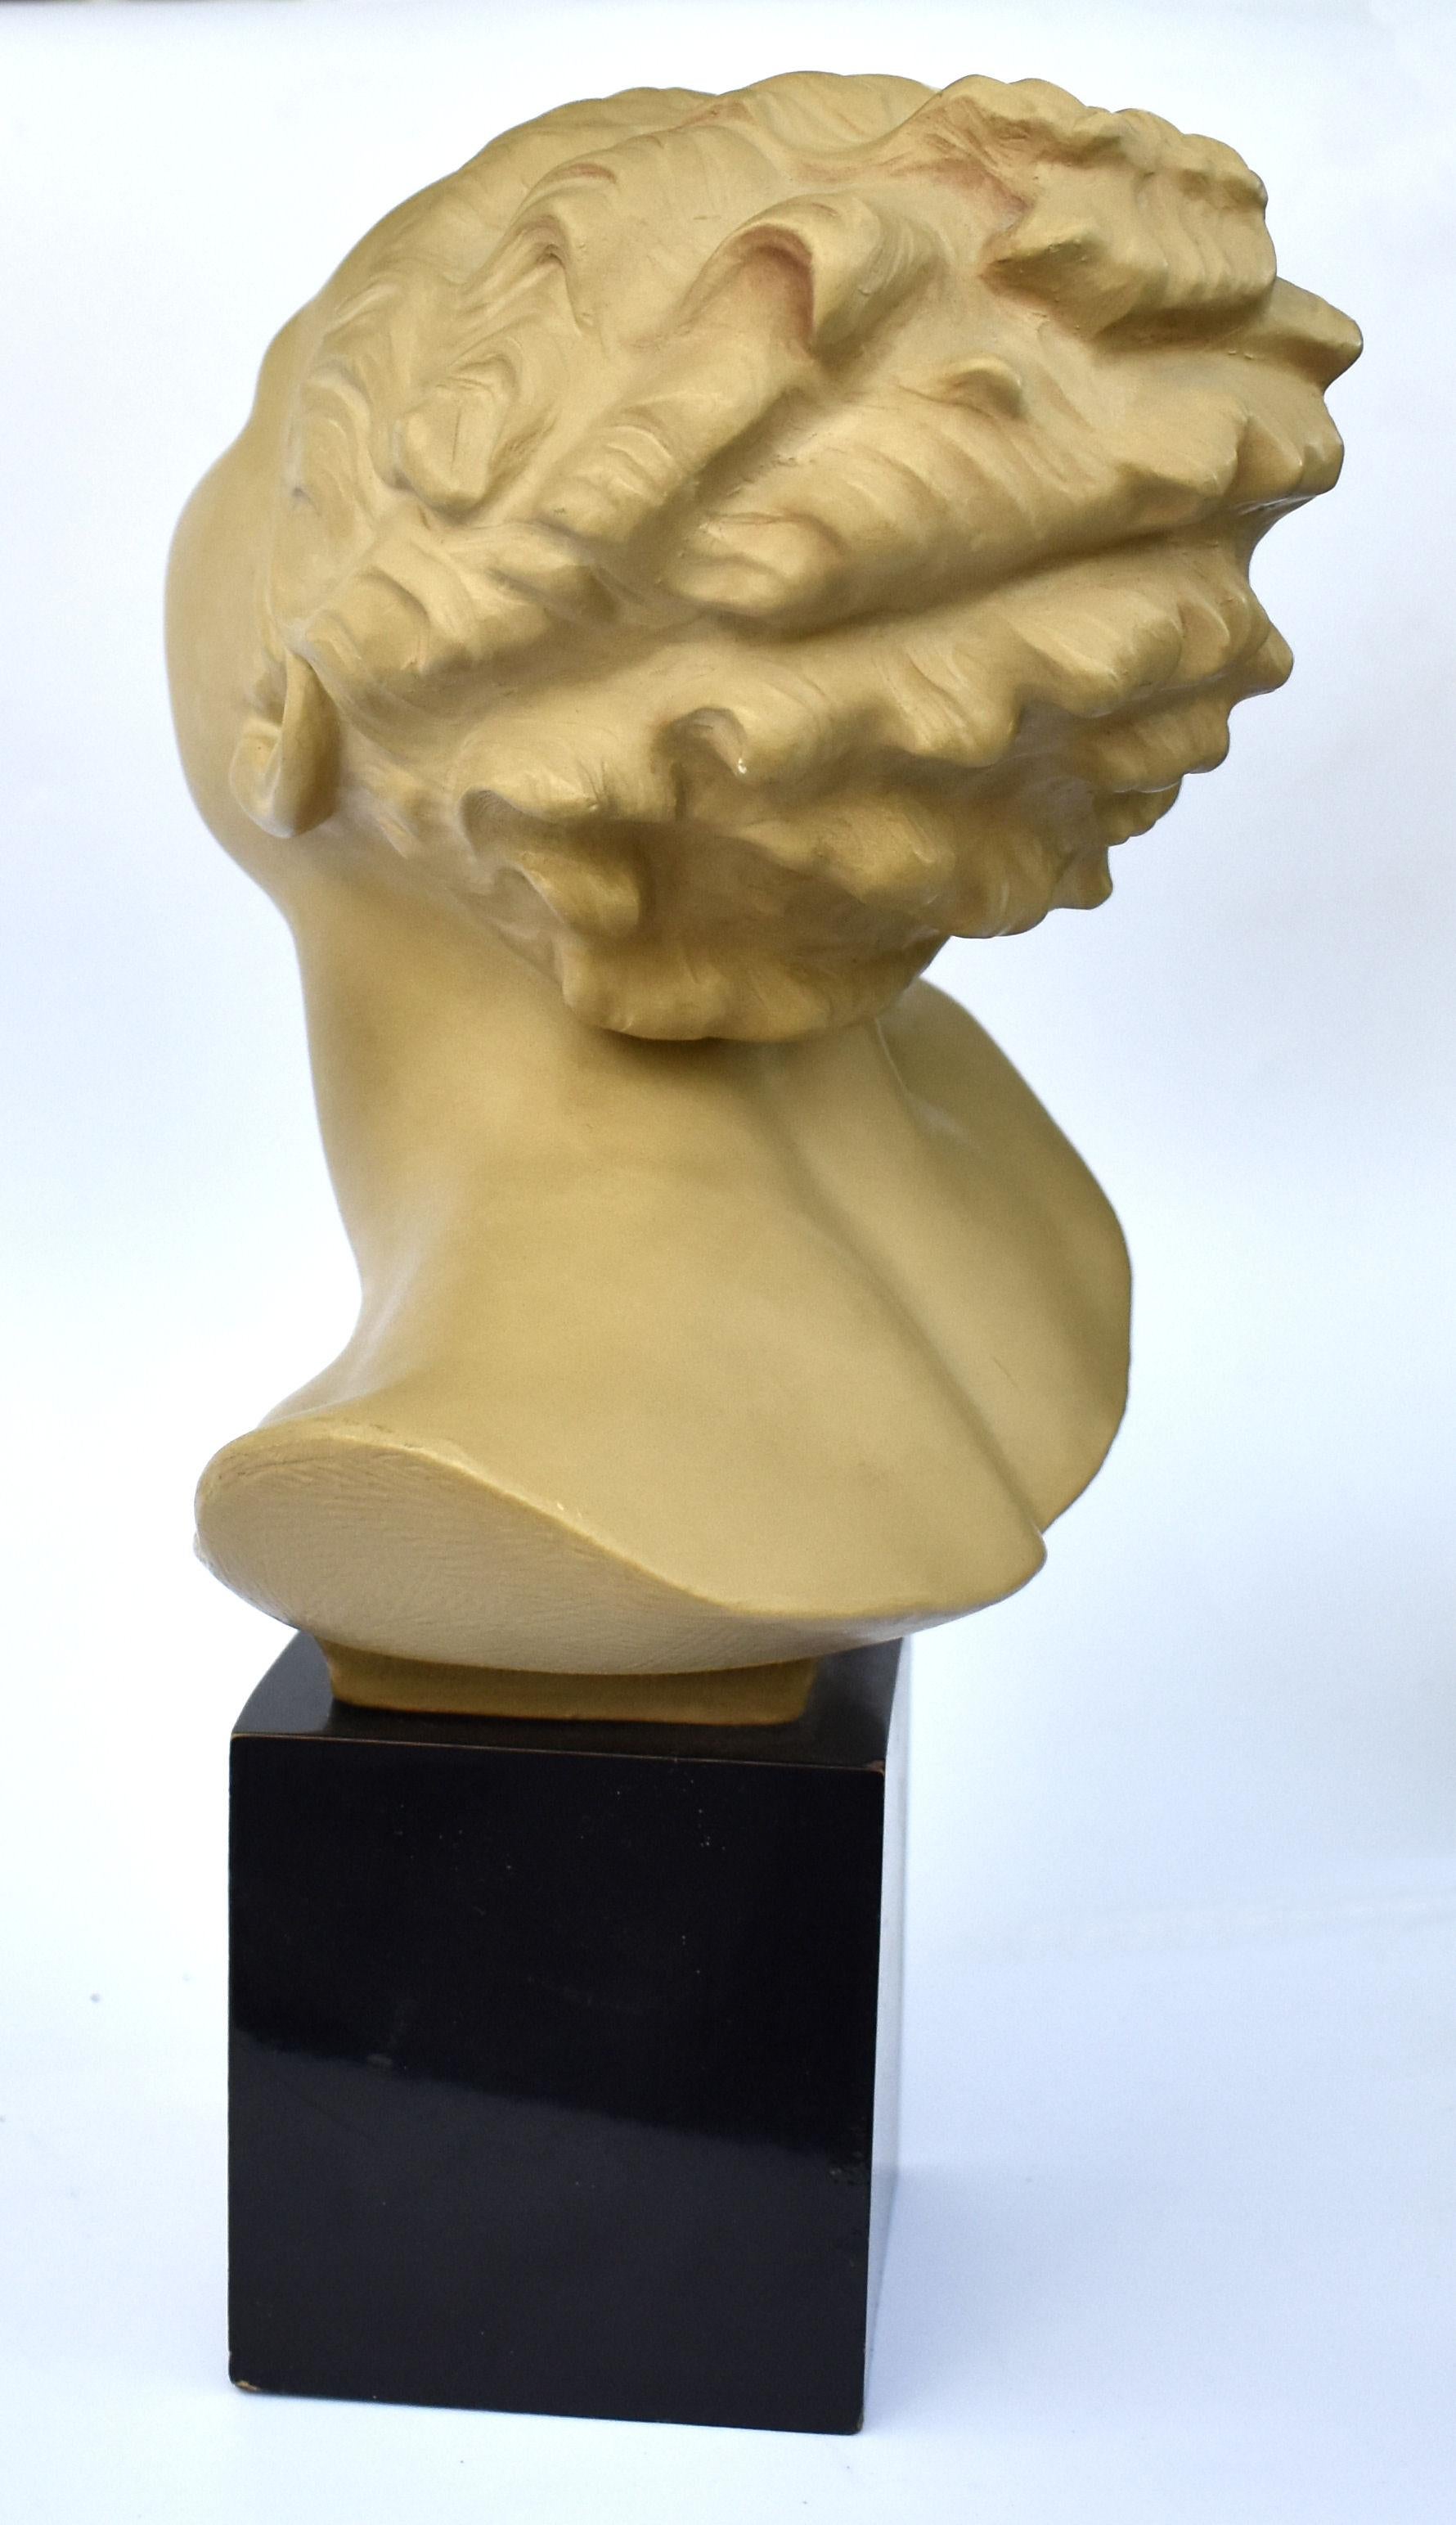 20th Century Art Deco Bust On Stand, c1930 By Bohumil Rezl For Sale